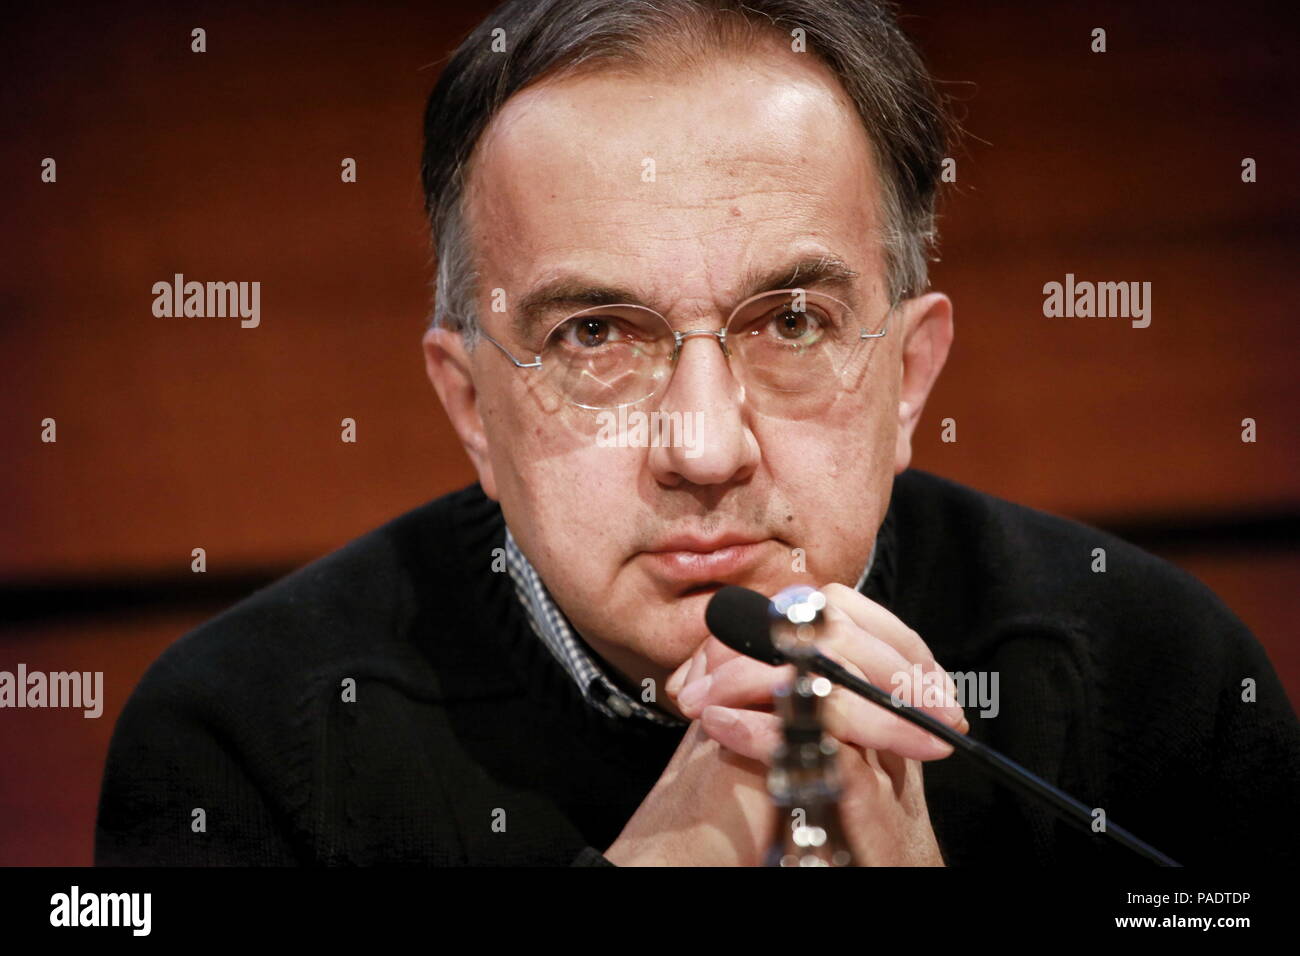 Milan, Italy - 31 march 2014: Sergio Marchionne chief executive officer of FCA speaks during a news conference Stock Photo